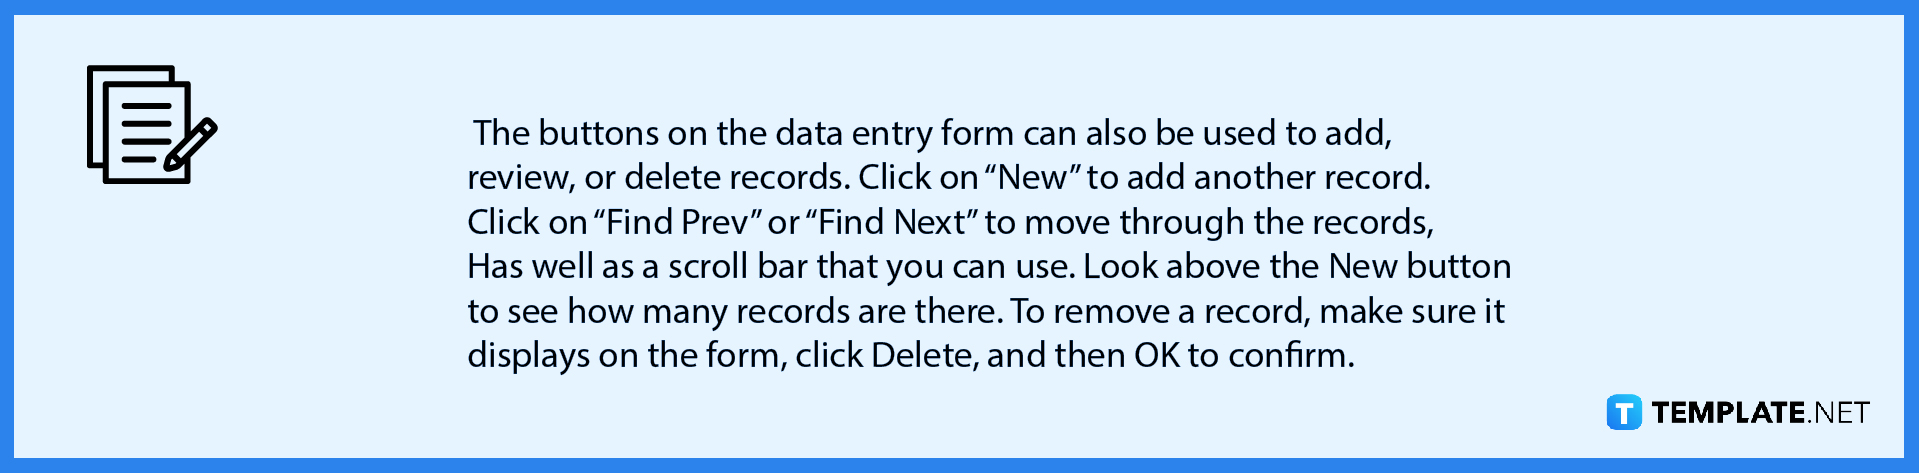 how-to-create-data-entry-form-in-microsoft-excel